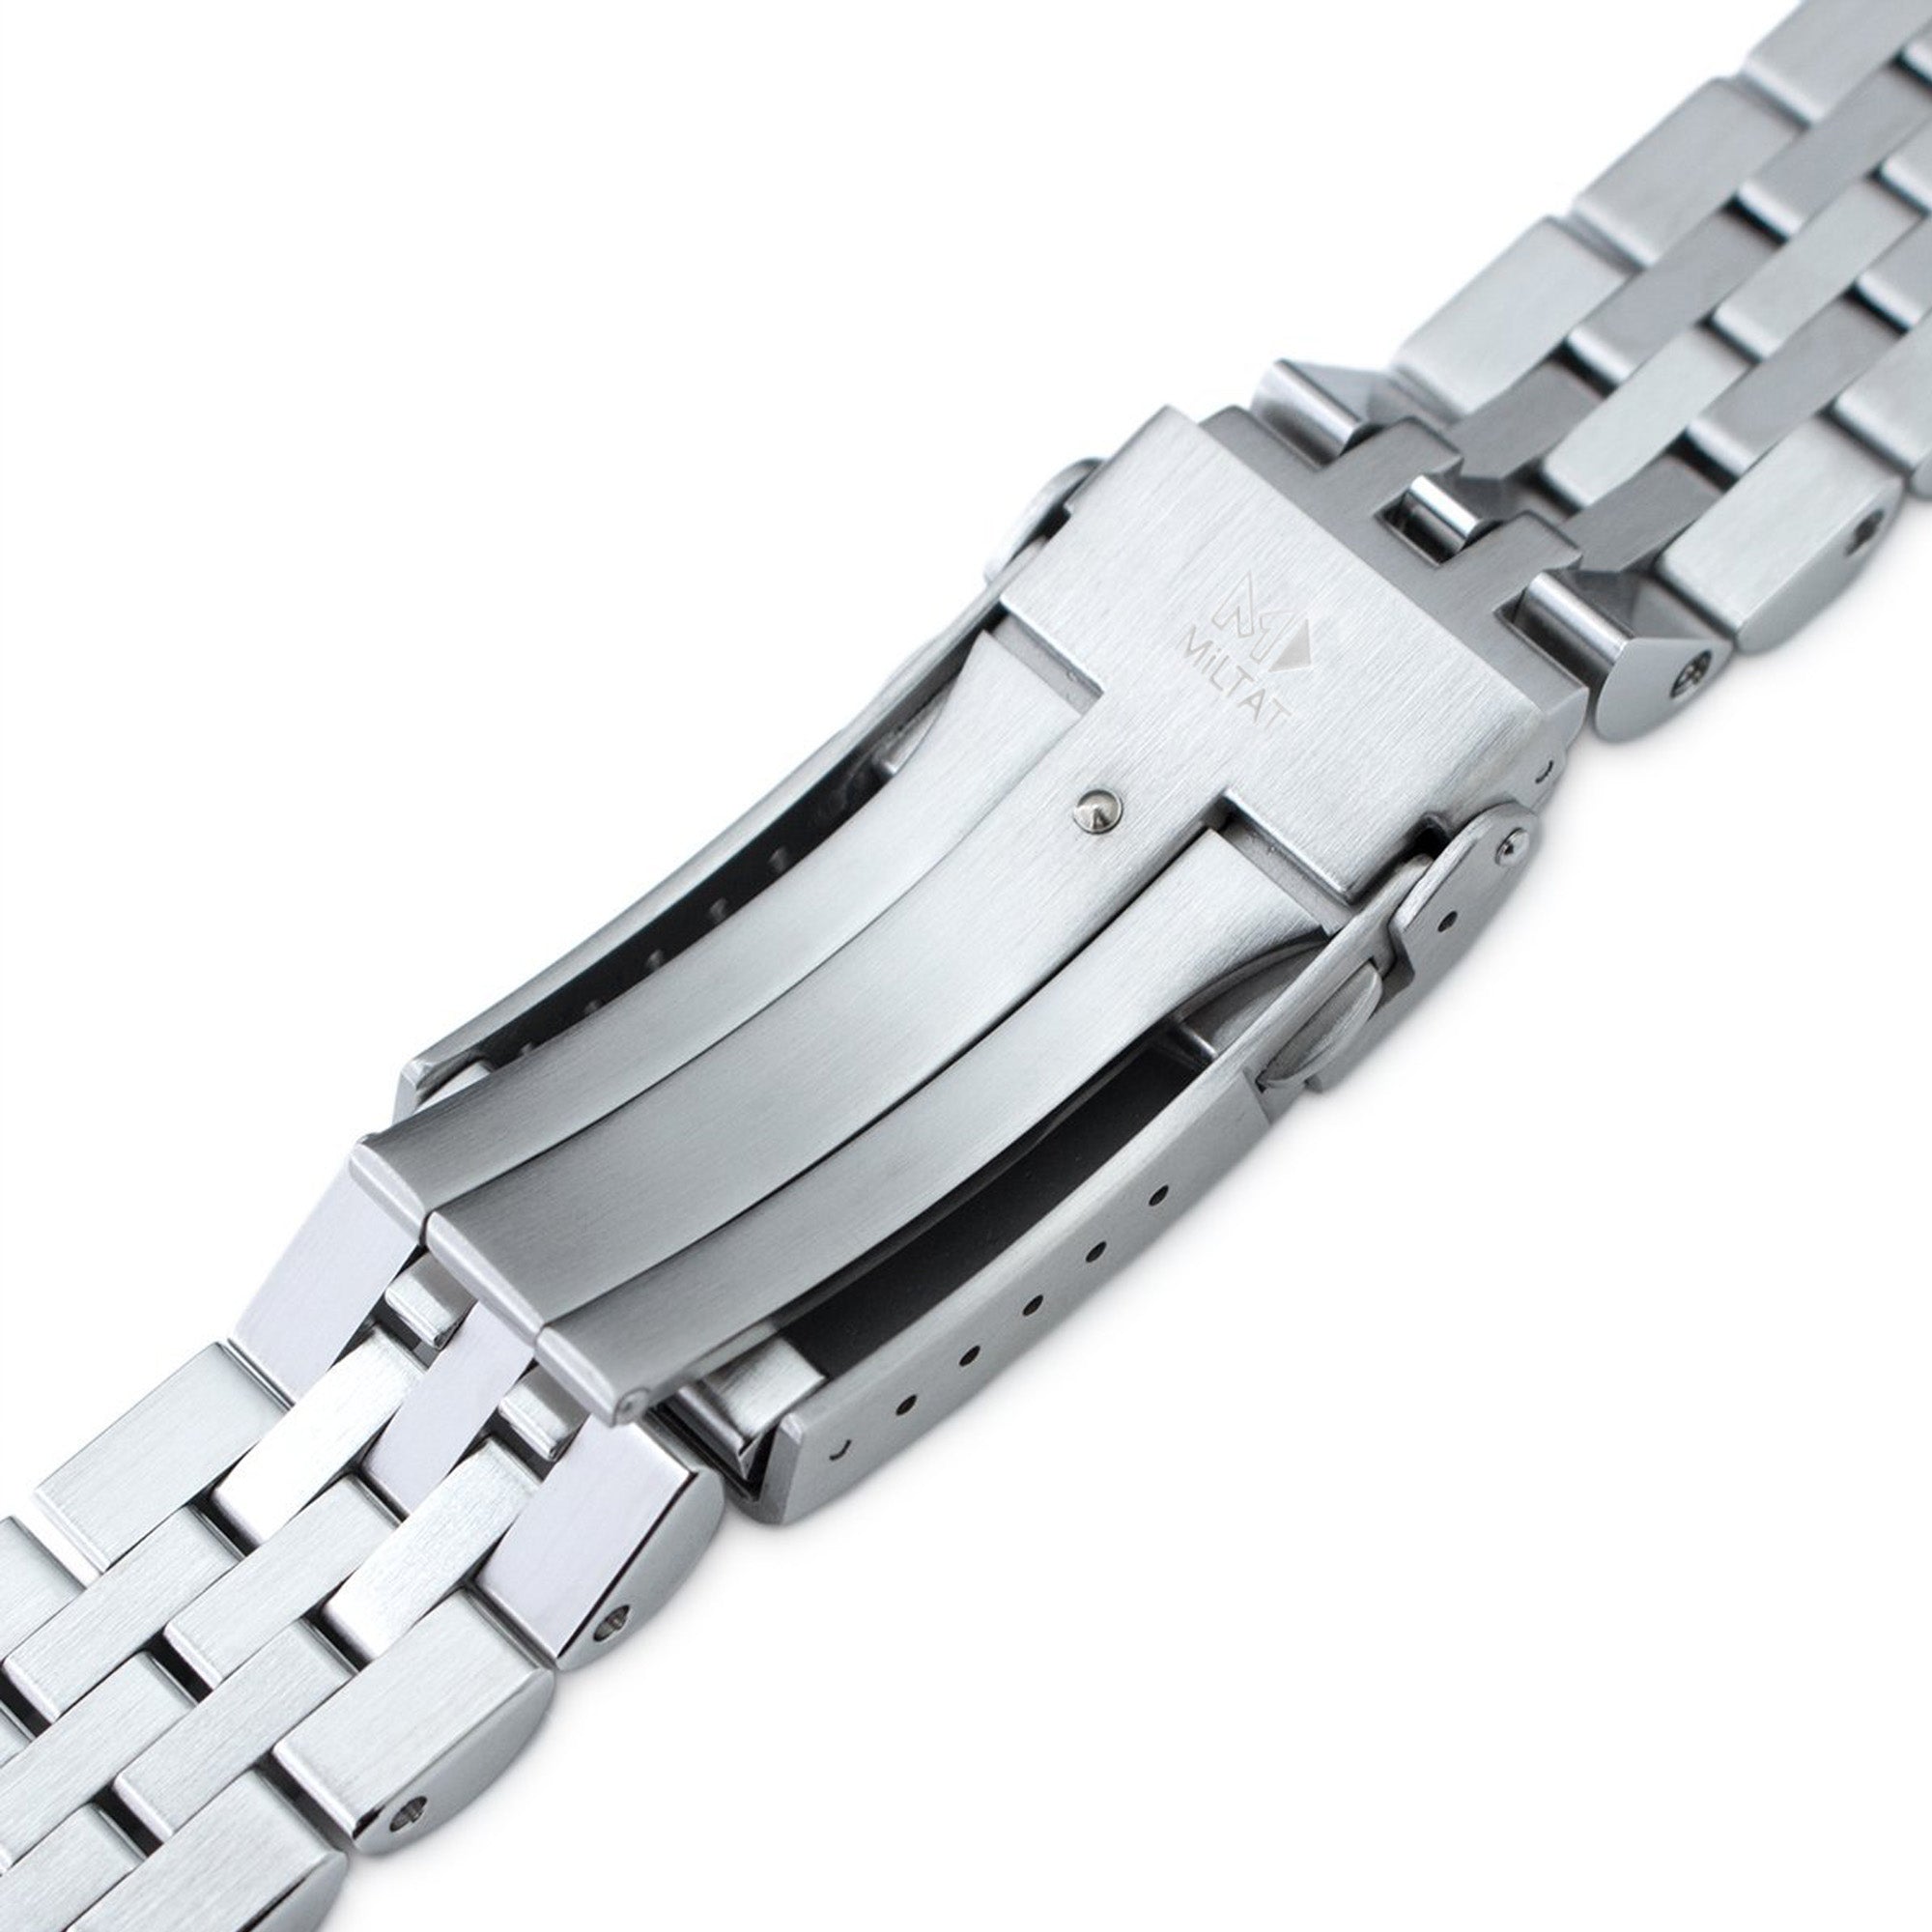 20mm Angus-J Louis JUB Watch Band compatible with Seiko Sumo SBDC001 SBDC031 & SPB101, 316L Stainless Steel Brushed/Polished V-Clasp